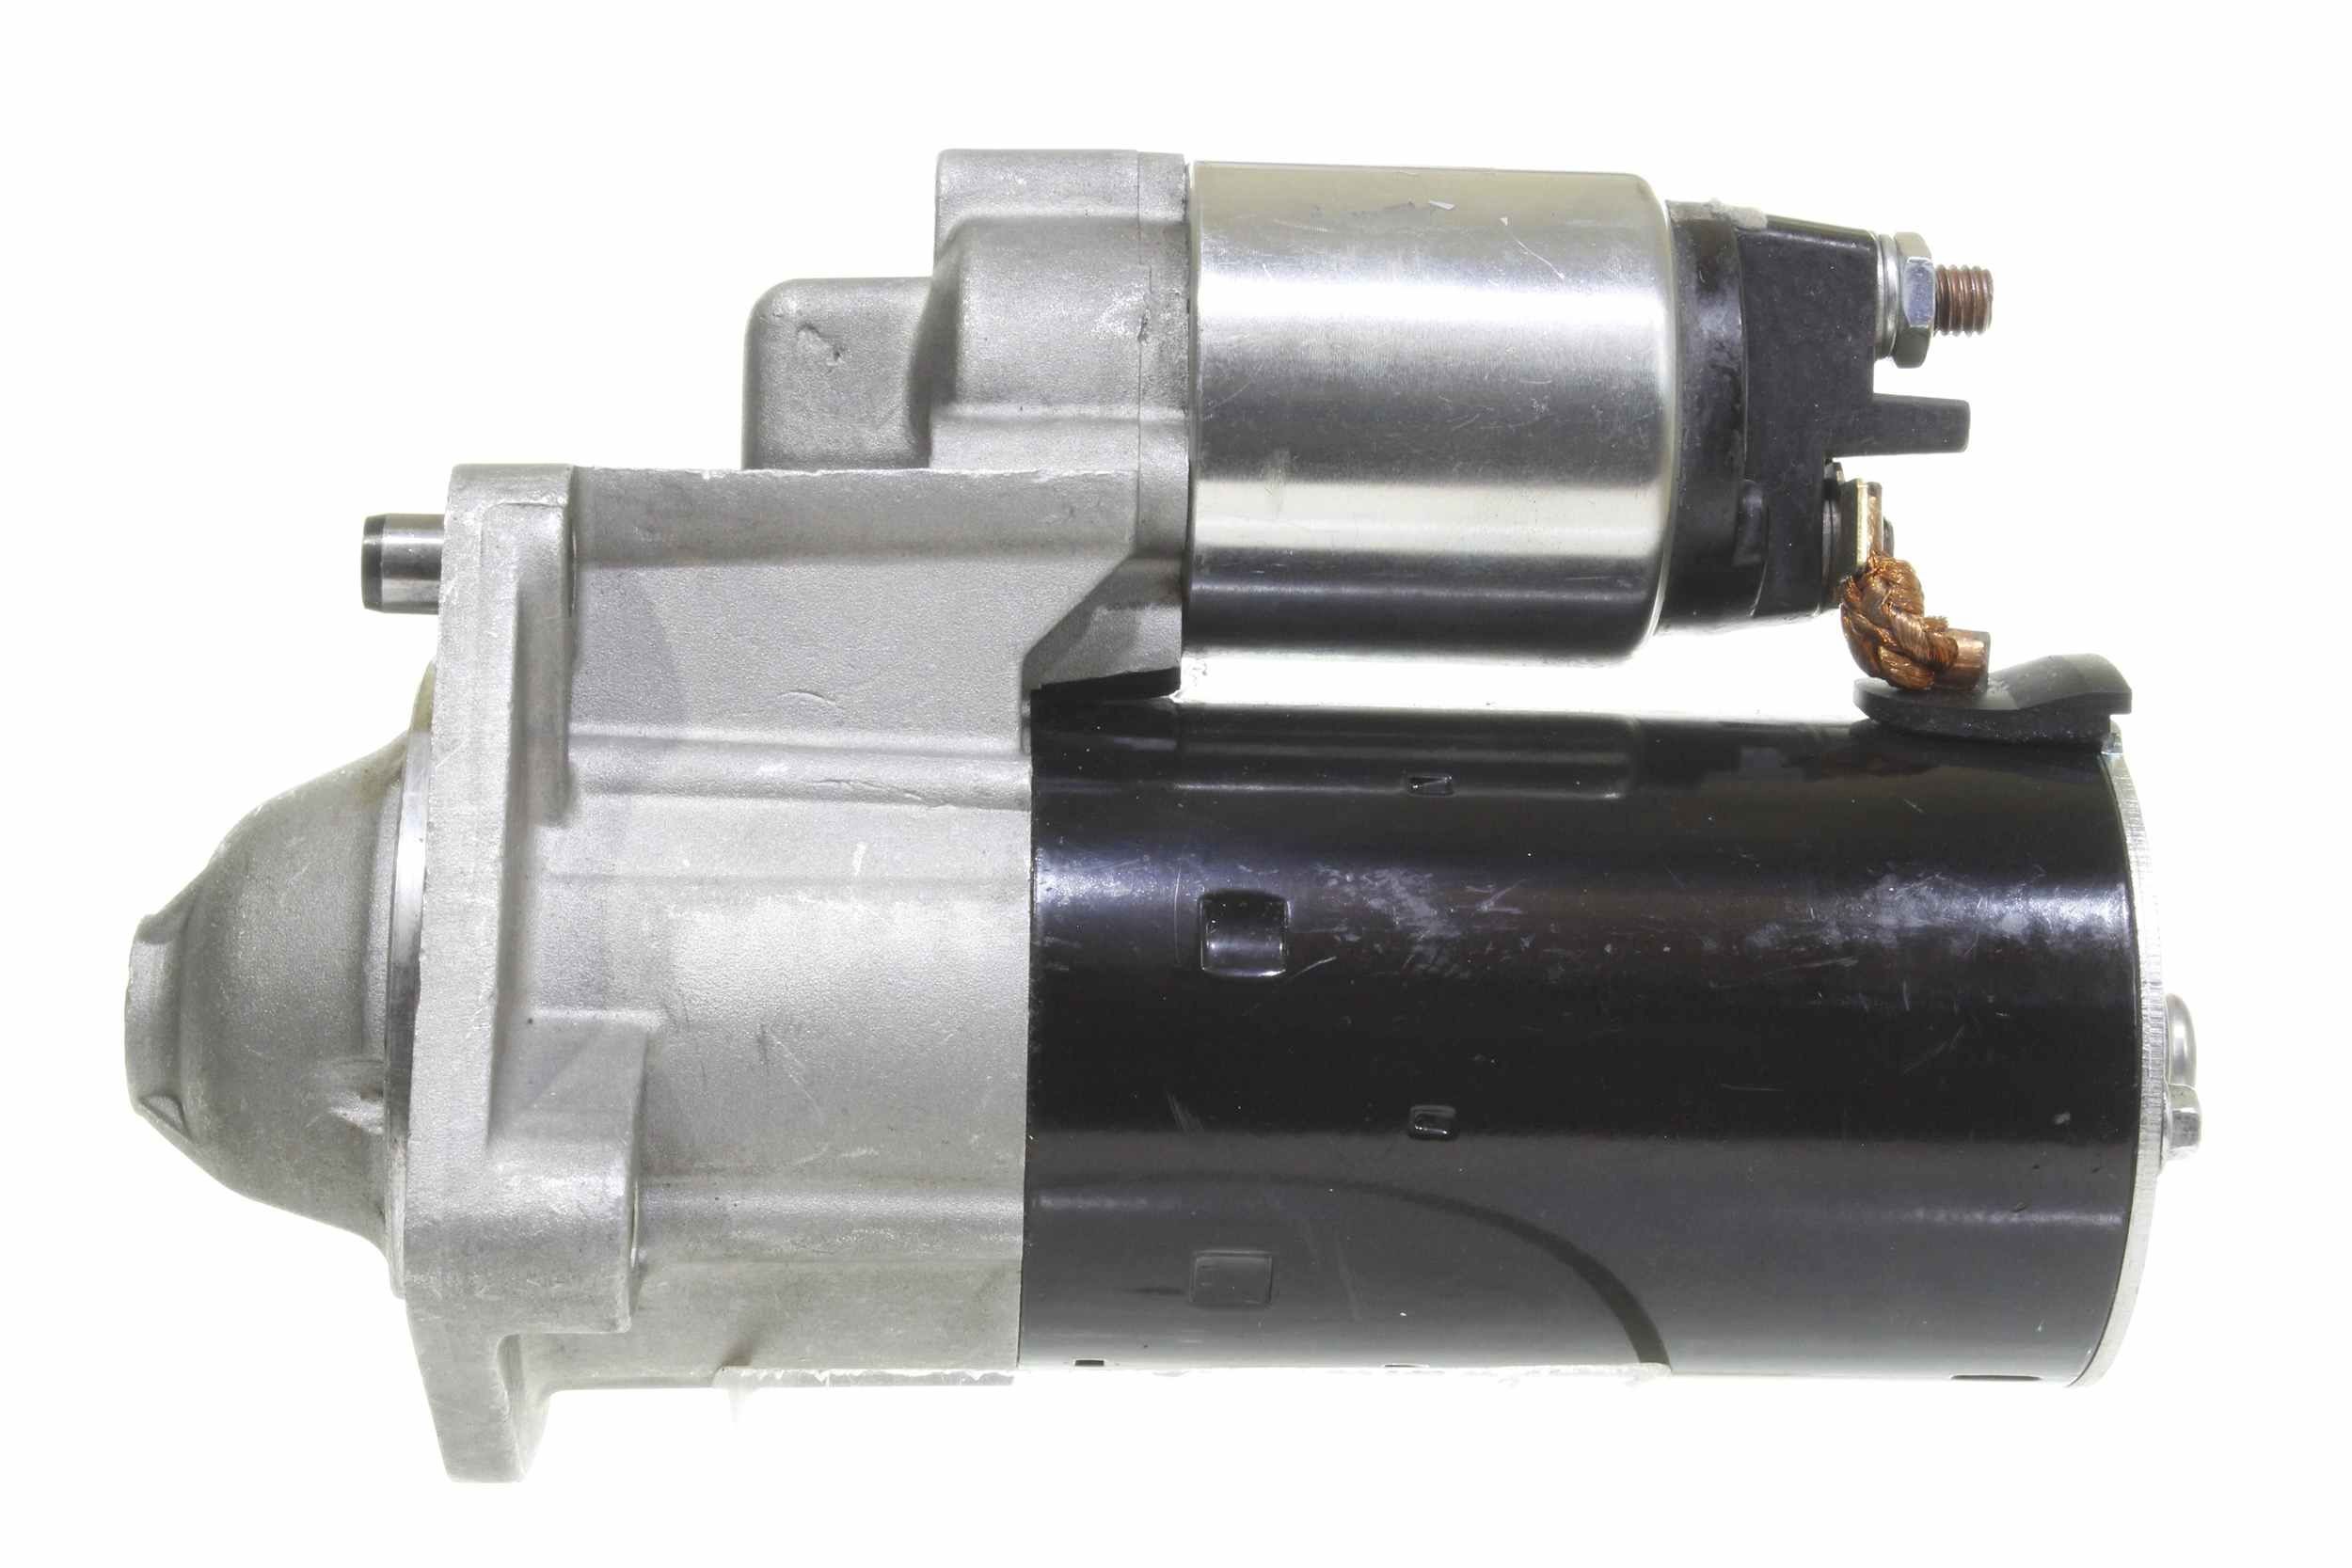 10441243 Engine starter motor ALANKO RNL2086 review and test